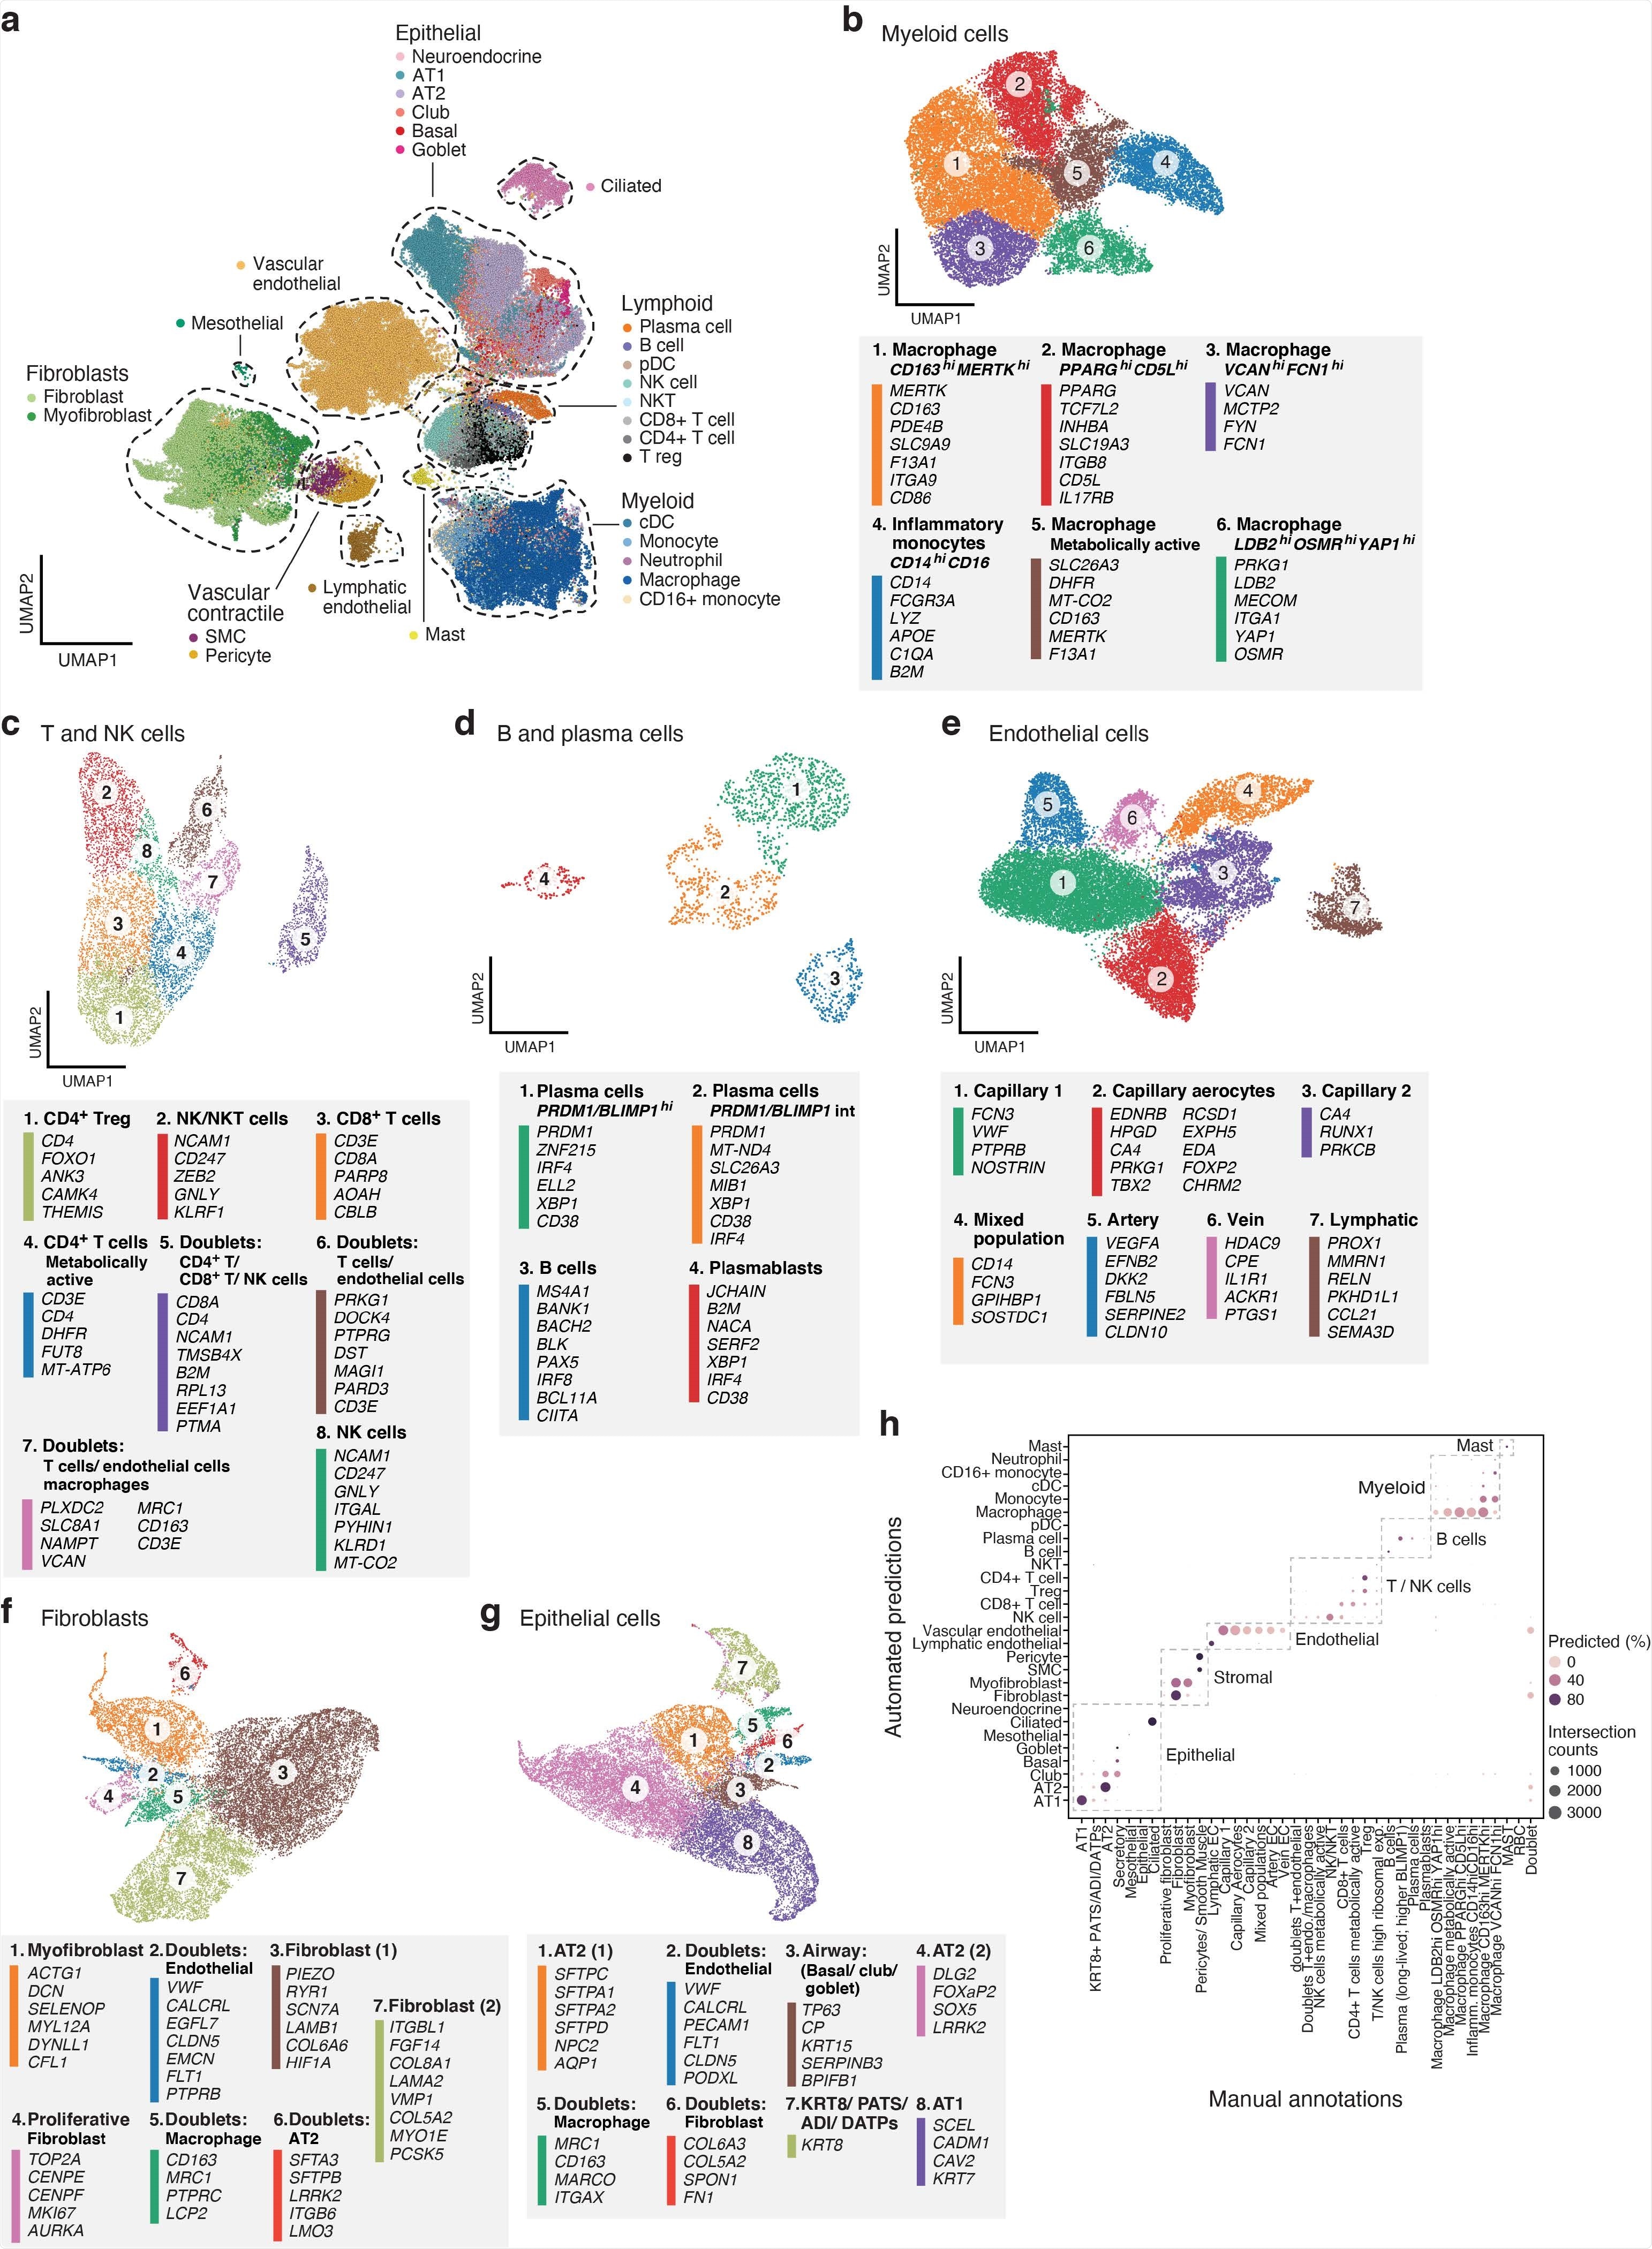 A single cell and single nucleus atlas of COVID-19 lung a. Automatic prediction identifies cells from 28 subsets across epithelial, immune and stromal compartments. UMAP embedding of 106,792 harmonized scRNA-Seq and snRNA-Seq profiles (dots) from all 16 COVID-19 lung donors, colored by their automatically predicted cell type (legend). b-g. Refined annotation of cell subsets within lineages. UMAP embeddings of each selected cell lineages with cells colored by manually annotated sub-clusters. Color legends highlight highly expressed marker genes for select subsets. b. myeloid cells (24,417 cells/ nuclei), c. T and NK cells (9,950), d. B and plasma cells (1,693), e. endothelial cells (20,366), f. fibroblast (20,925), g. epithelial cells (21,700). h. High consistency between automatic and manual annotations. The proportion (color intensity) and number (dot size) of cells with a given predicted annotation (rows) in each manual annotation category (columns)